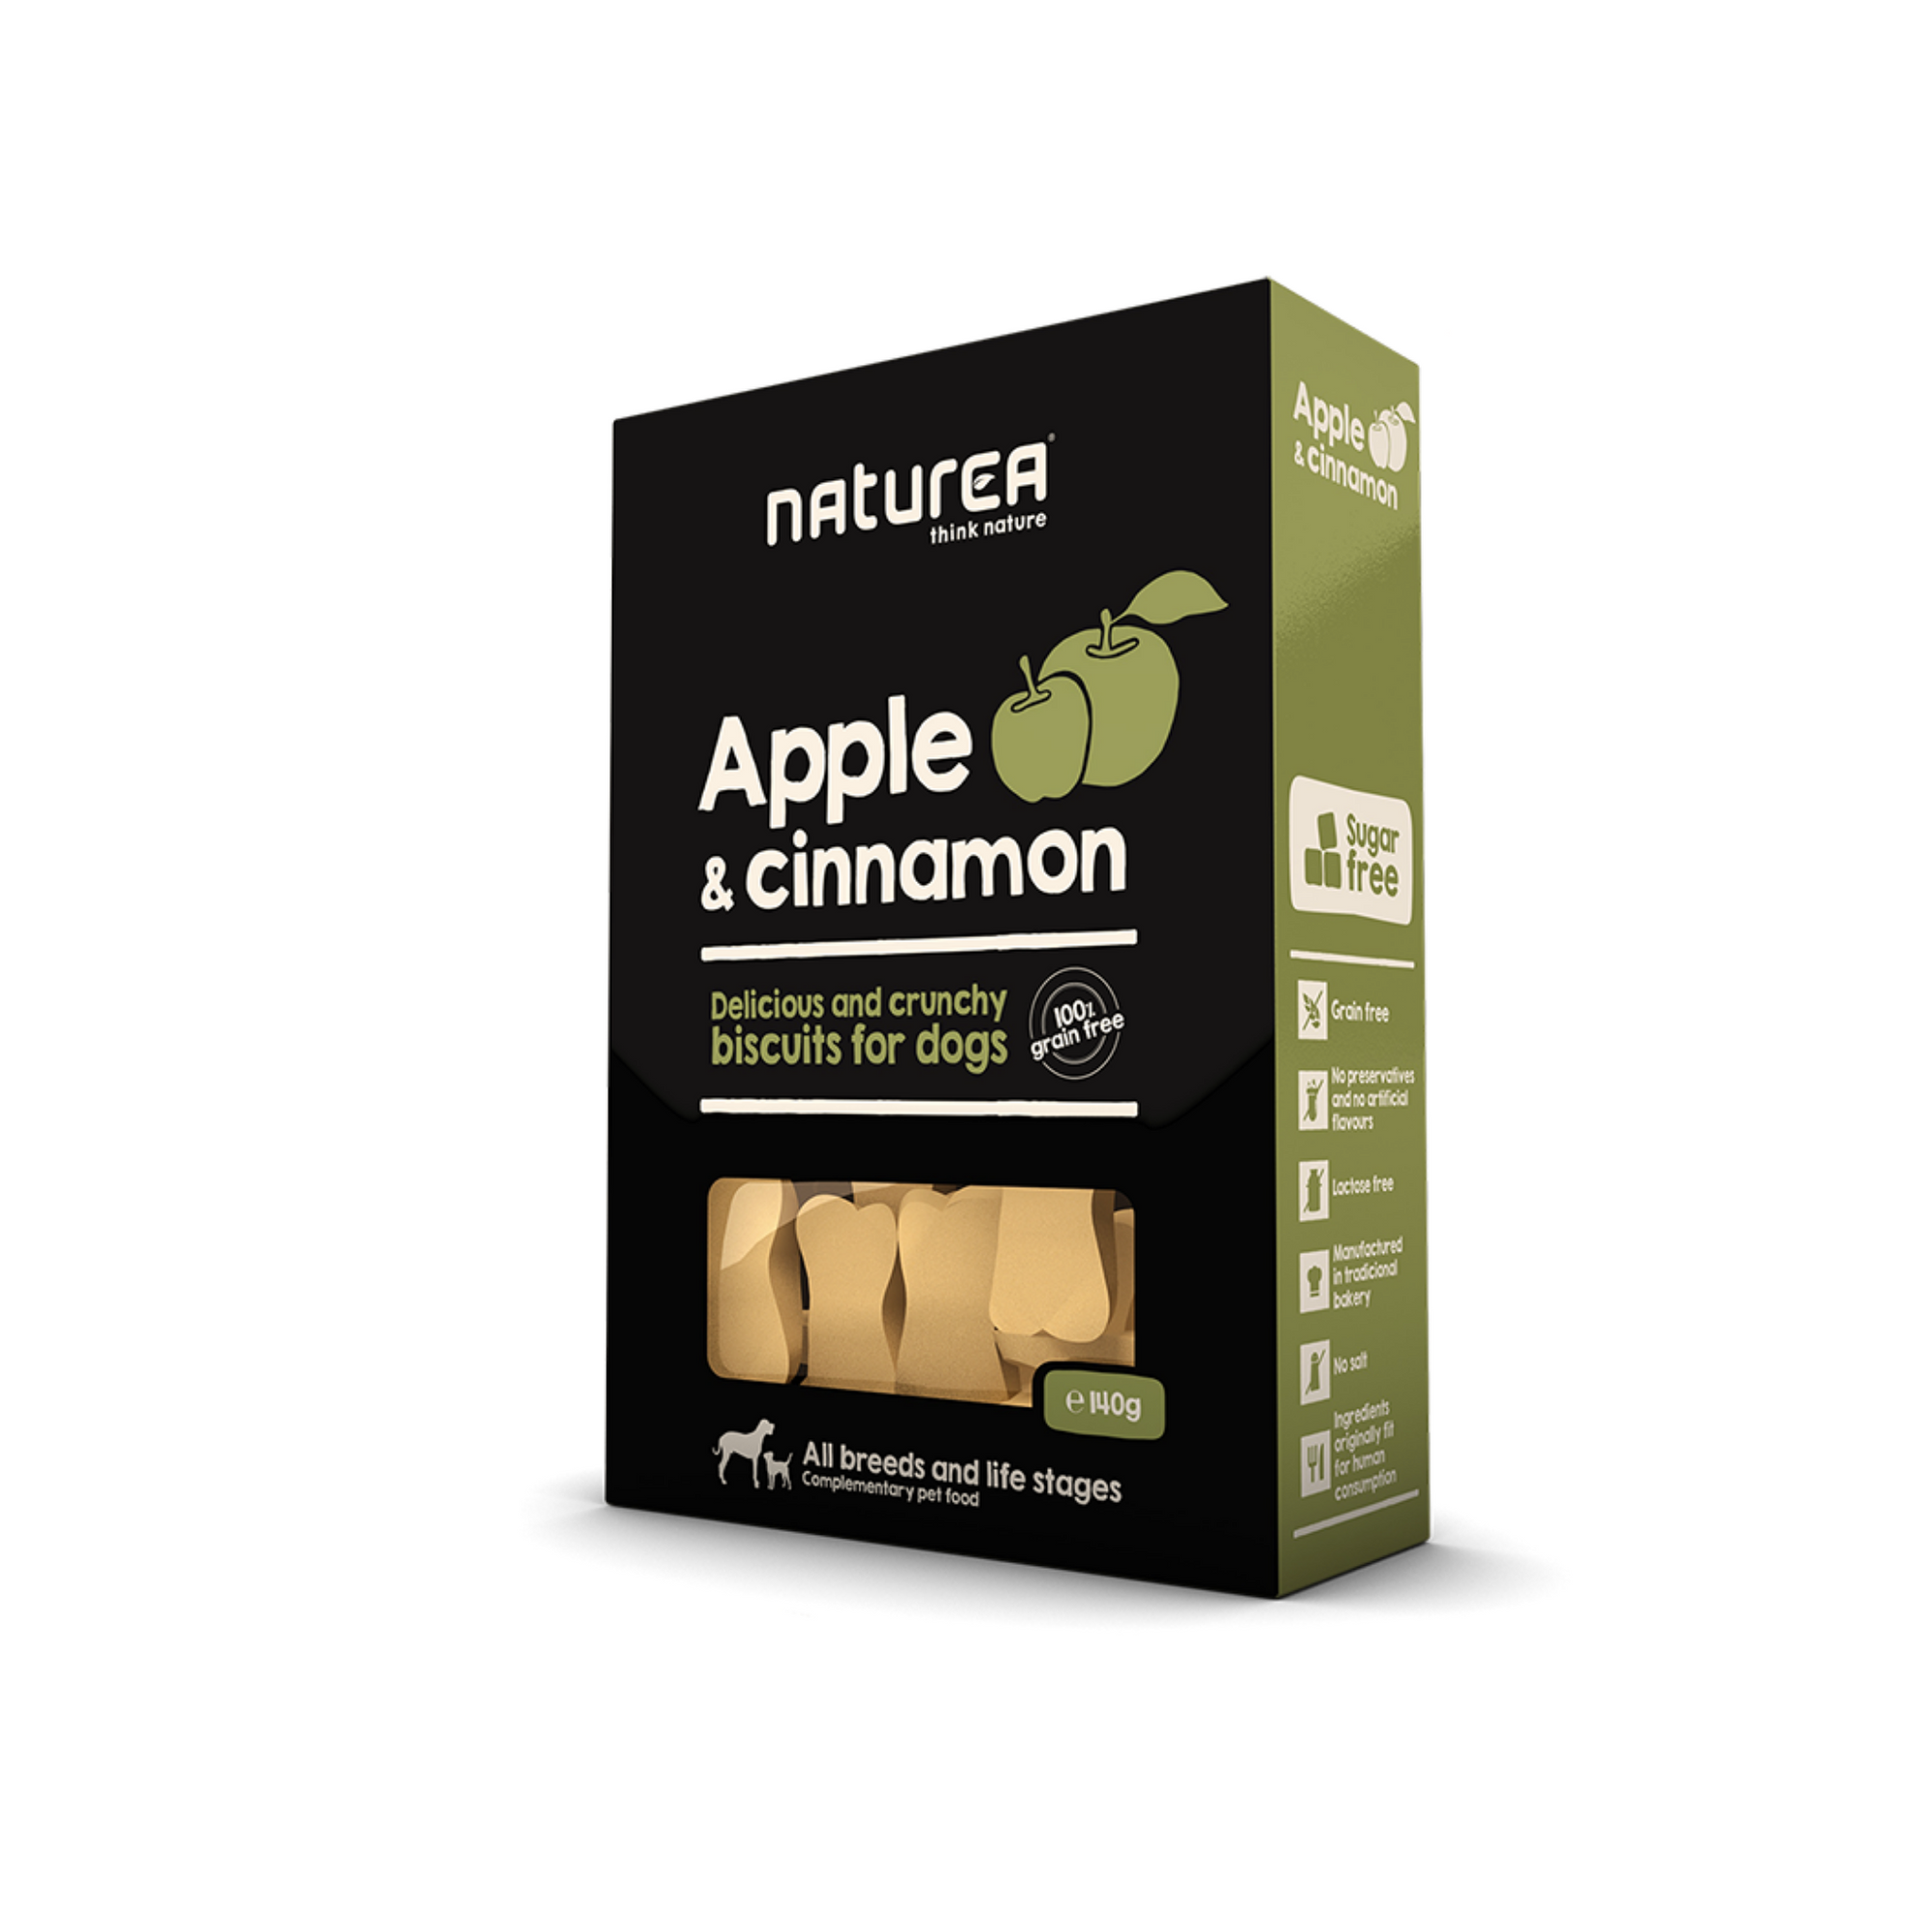 Delicious dog biscuits with apple and cinnamon flavor